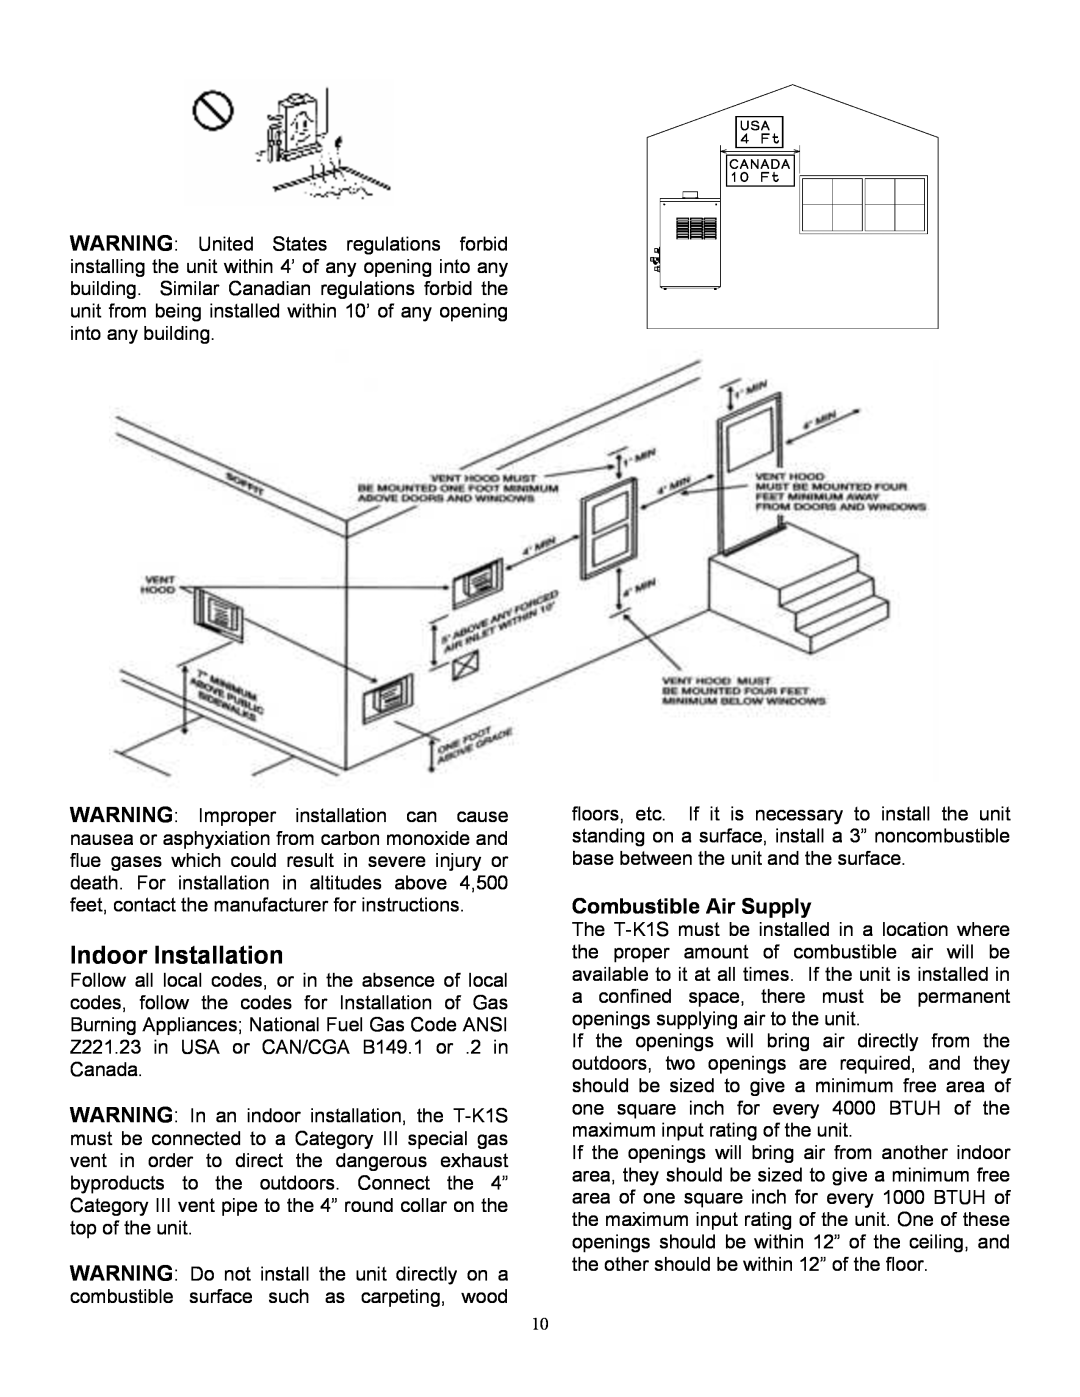 Whirlpool T-K1S installation manual Indoor Installation, Combustible Air Supply 